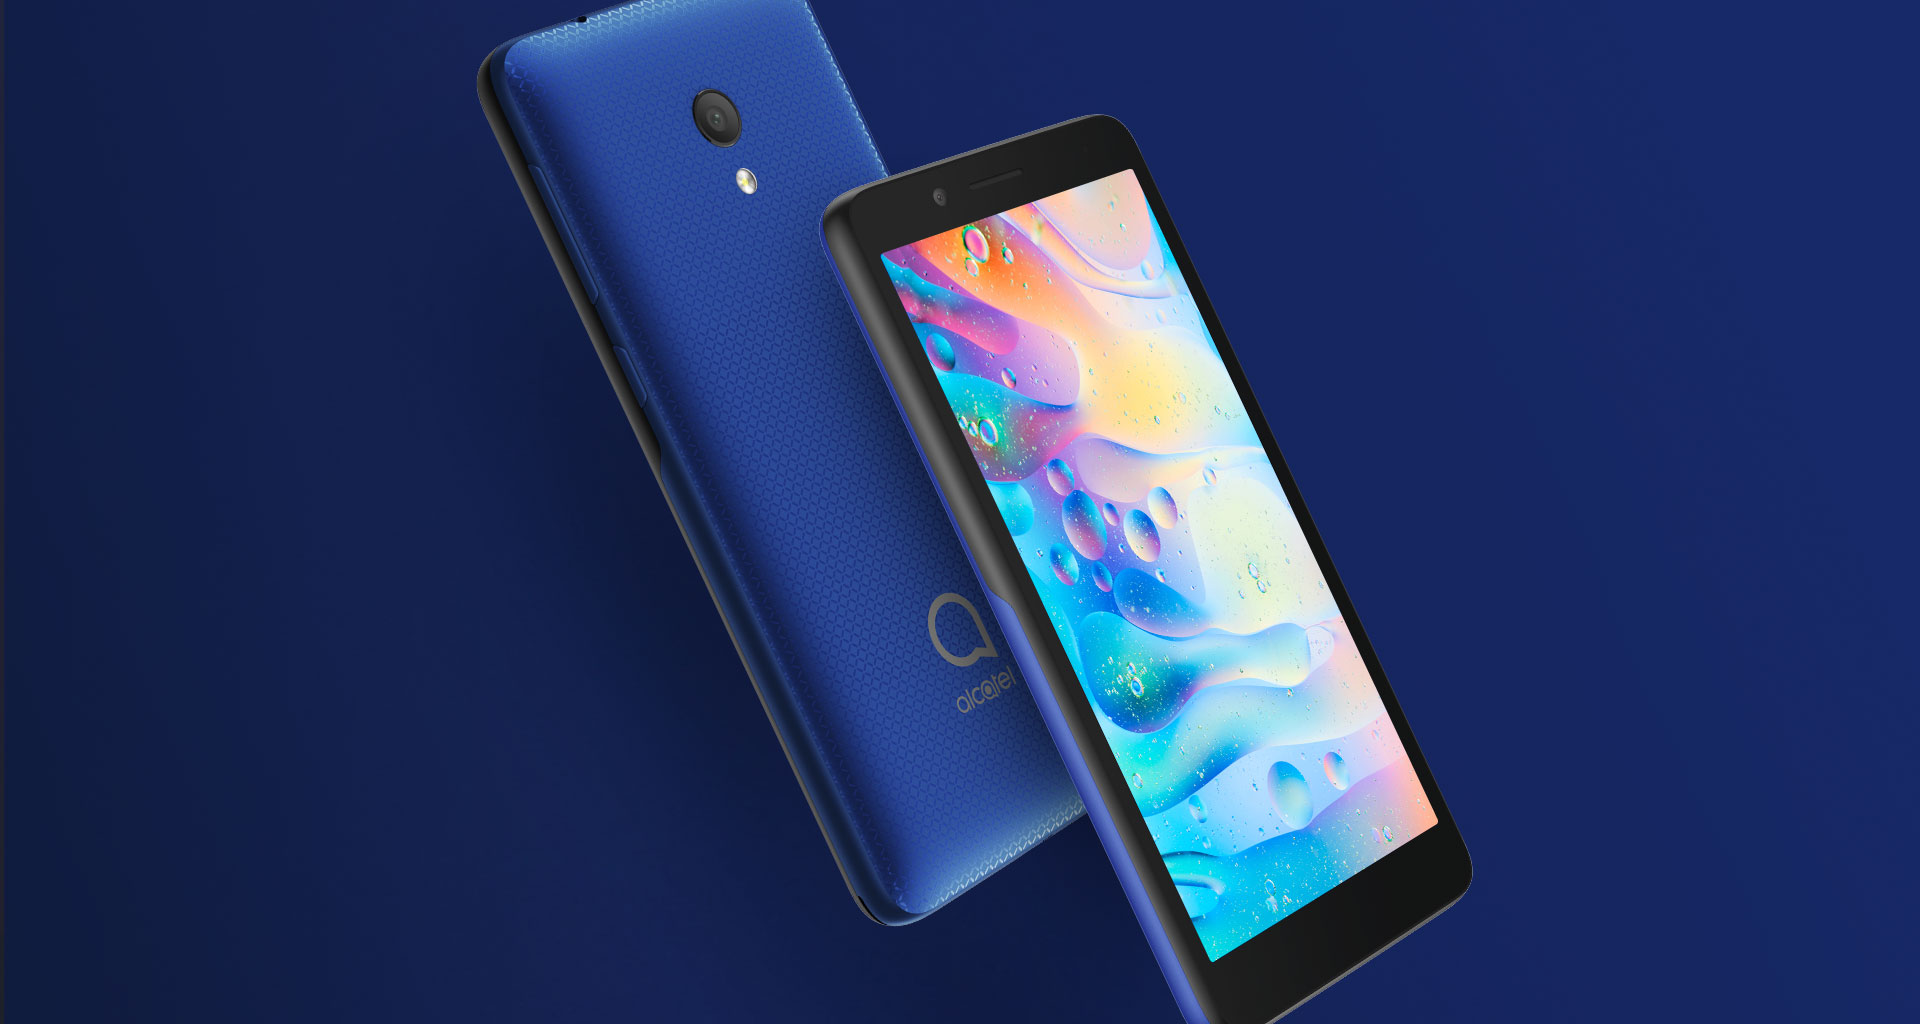 How to boot into safe mode on Alcatel 1c (2019)